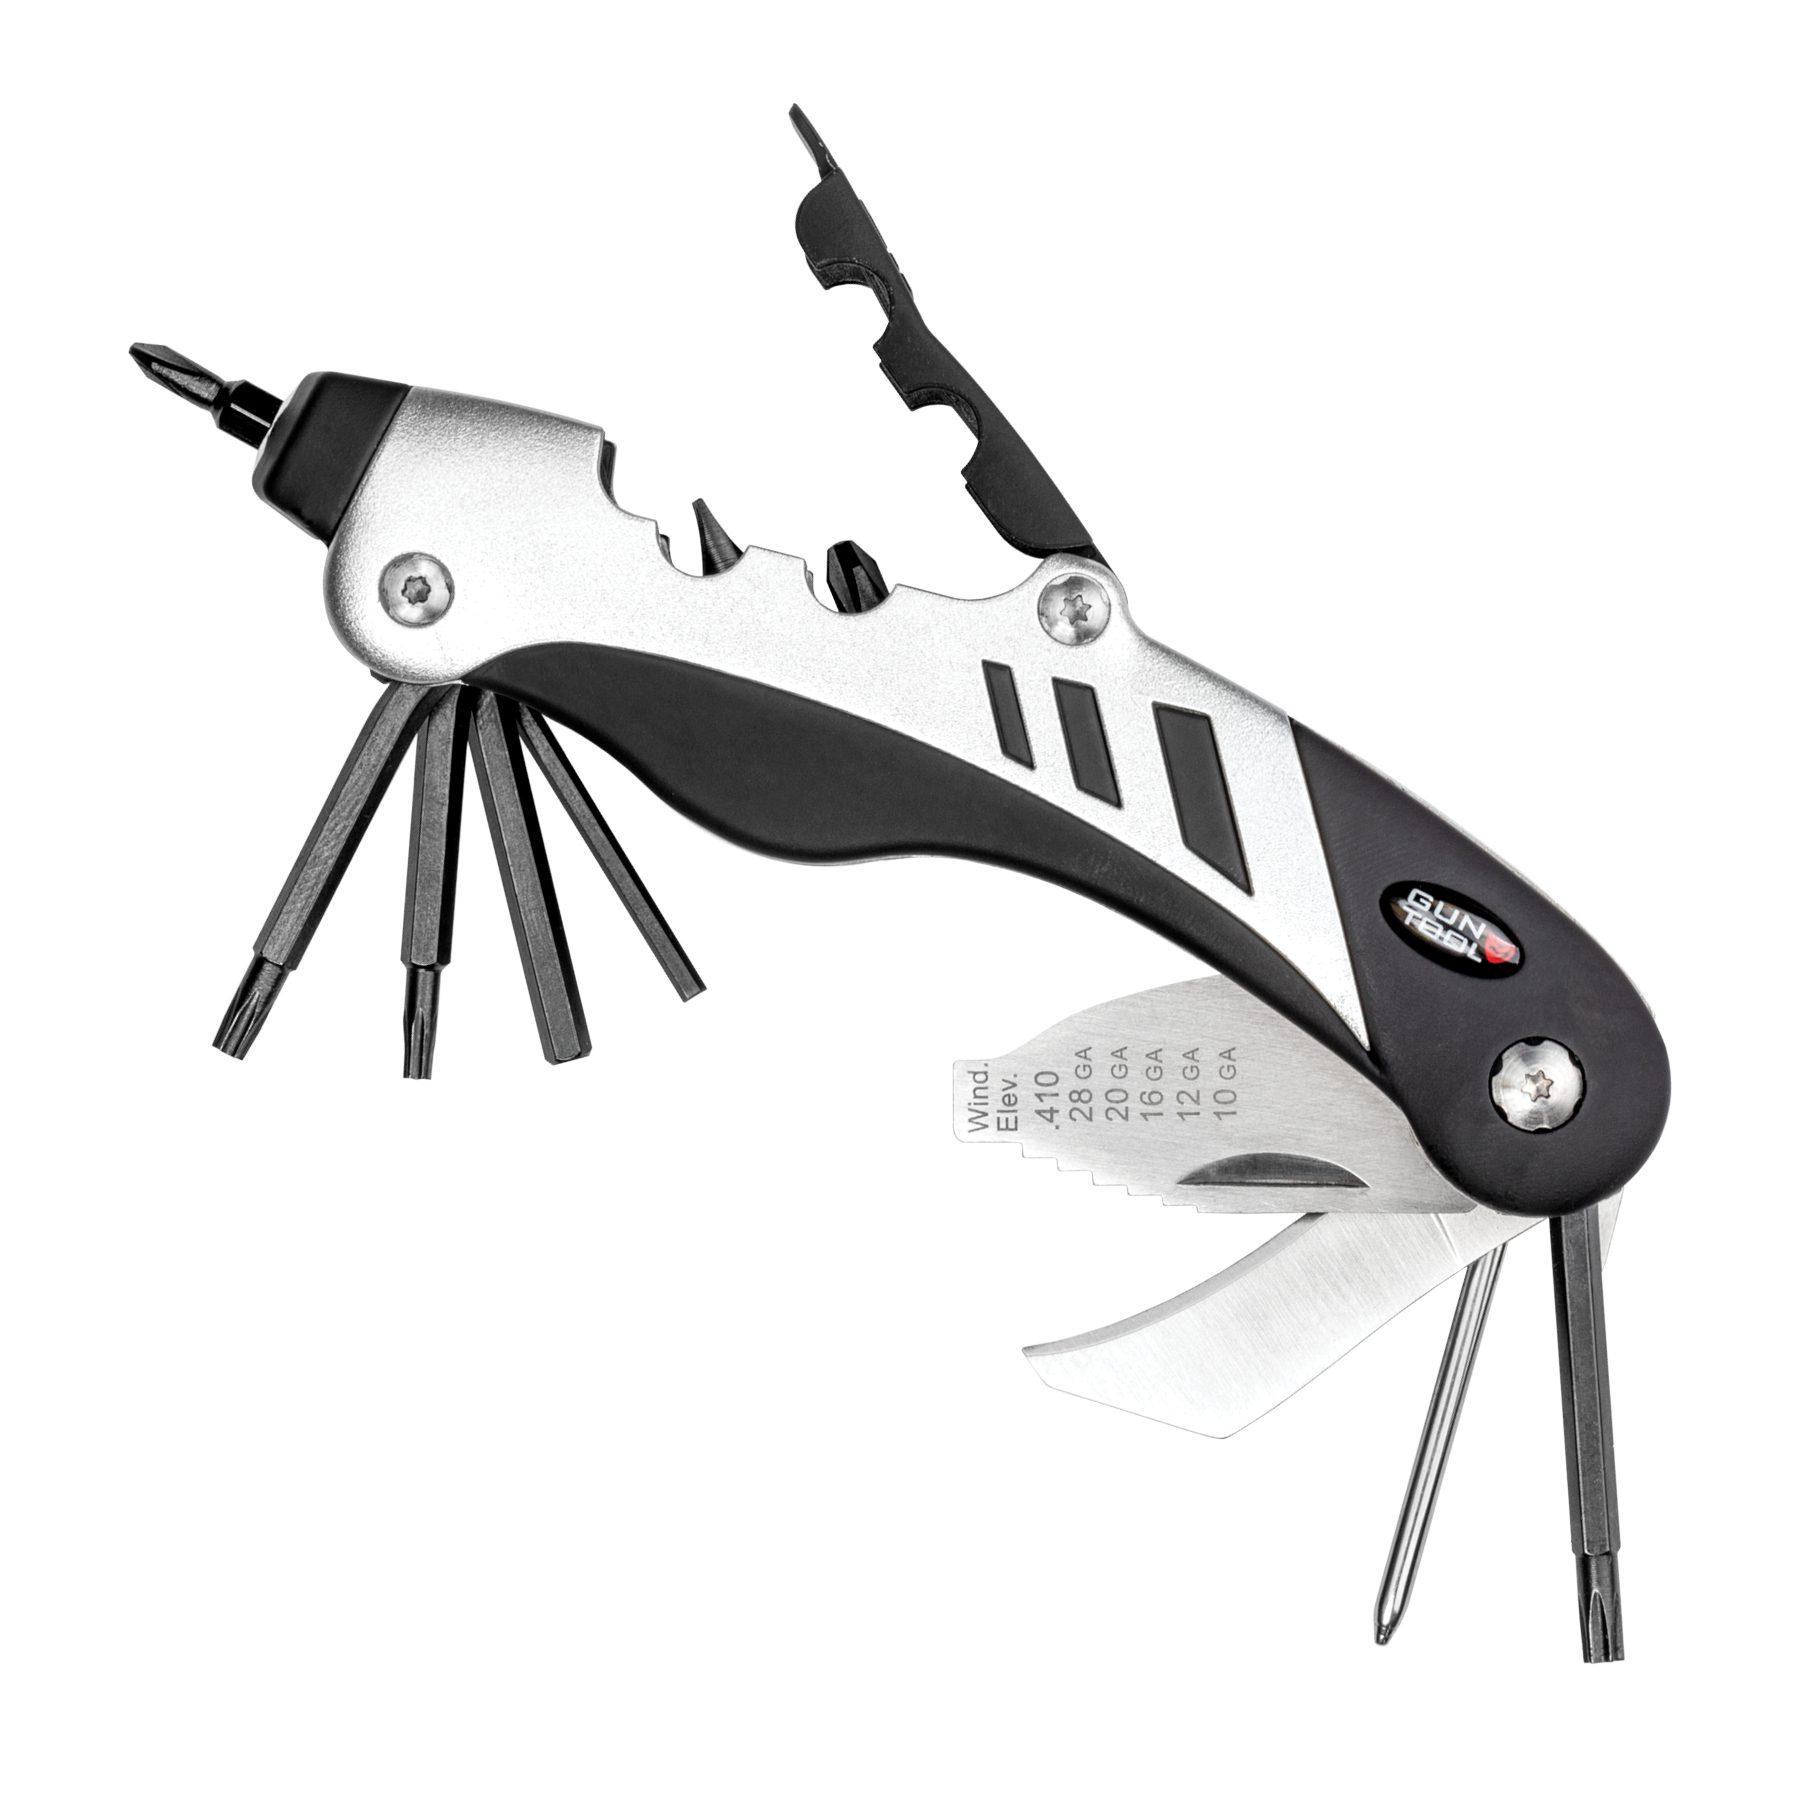 a swiss army knife with multiple blades on it